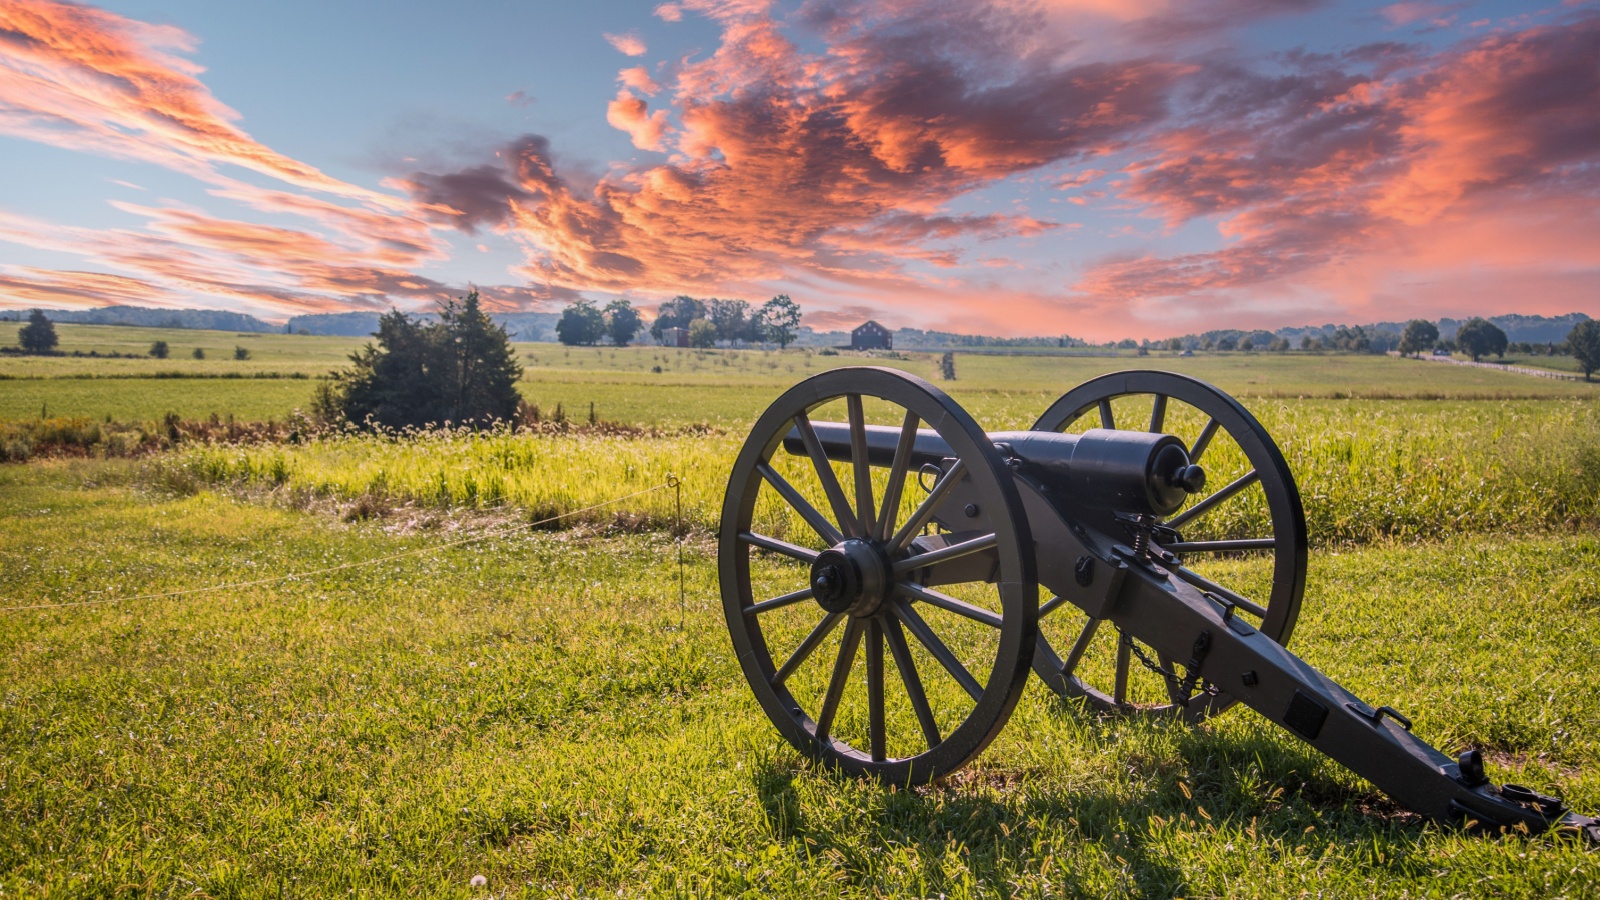 image credit: imagoDens/Shutterstock <p>Gettysburg is the site of the Civil War’s most famous battle, which turned the tide in favor of the Union. Today, it attracts hundreds of thousands of visitors annually who come to explore its vast museum, witness reenactments, and walk the historic grounds. The battlefield also offers guided tours that delve deep into the strategies and human stories behind the conflict.</p>